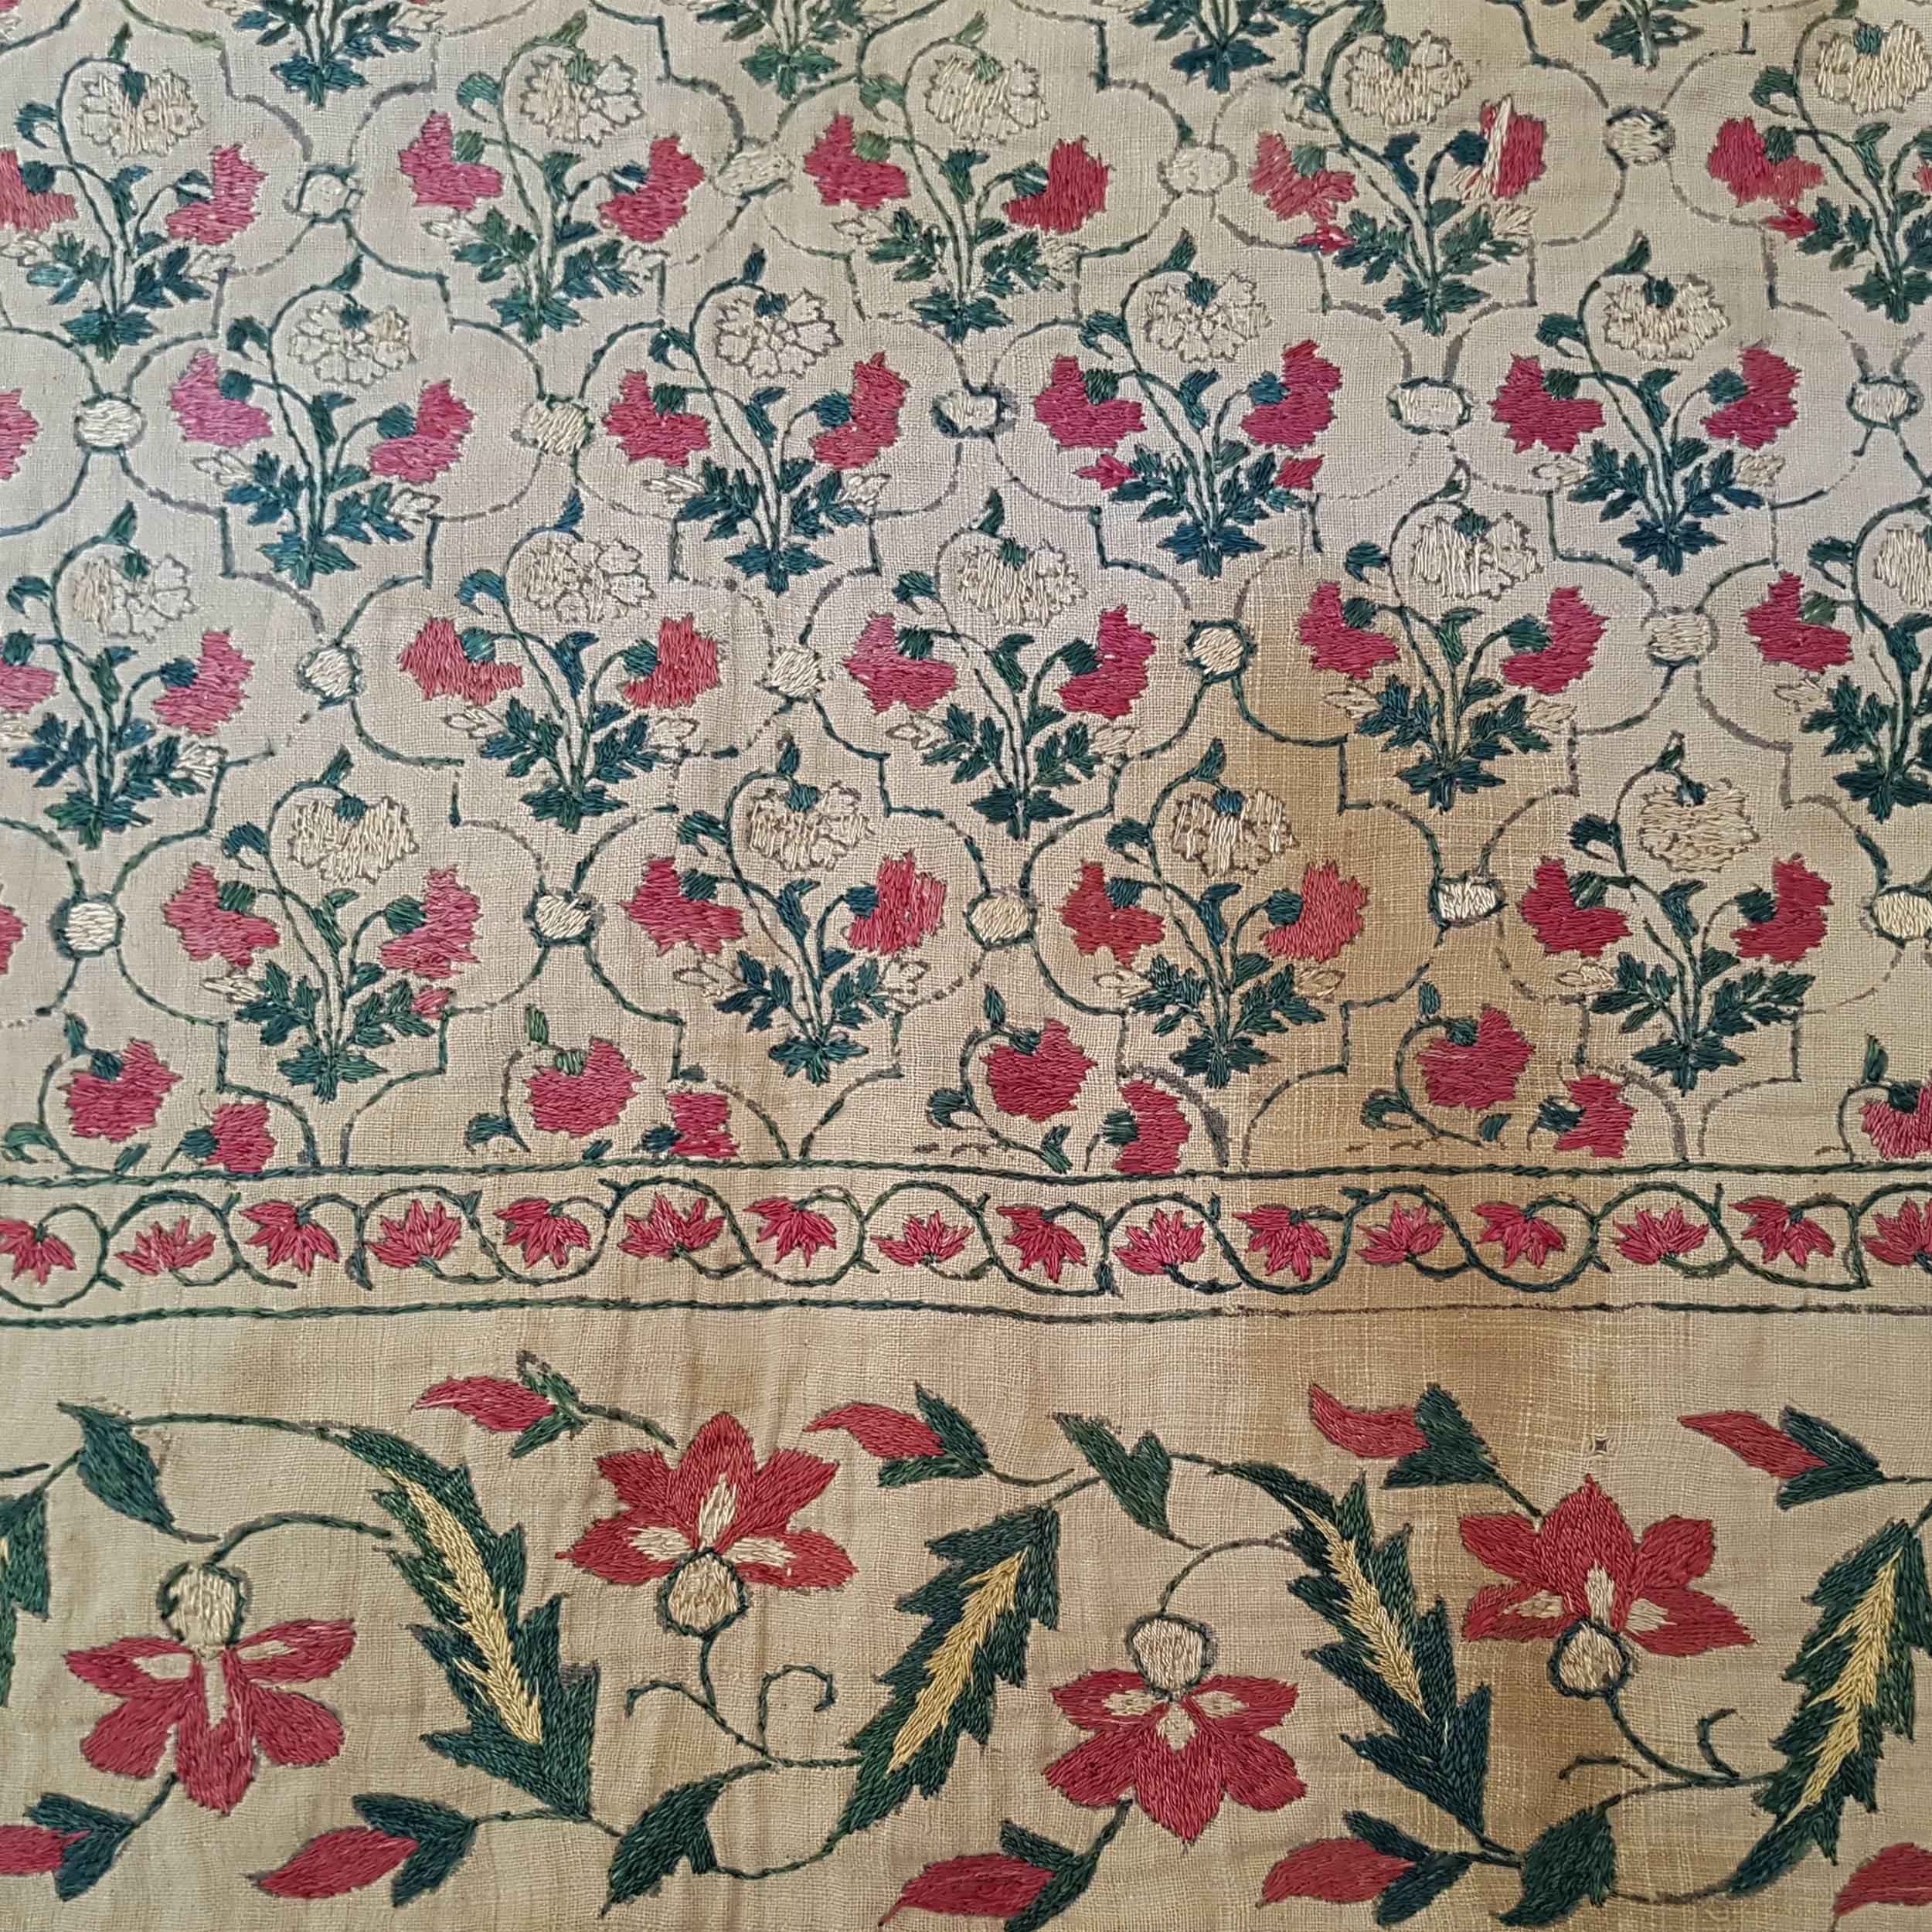 Indian Rare Mughal Dynasty Summer Carpet For Sale